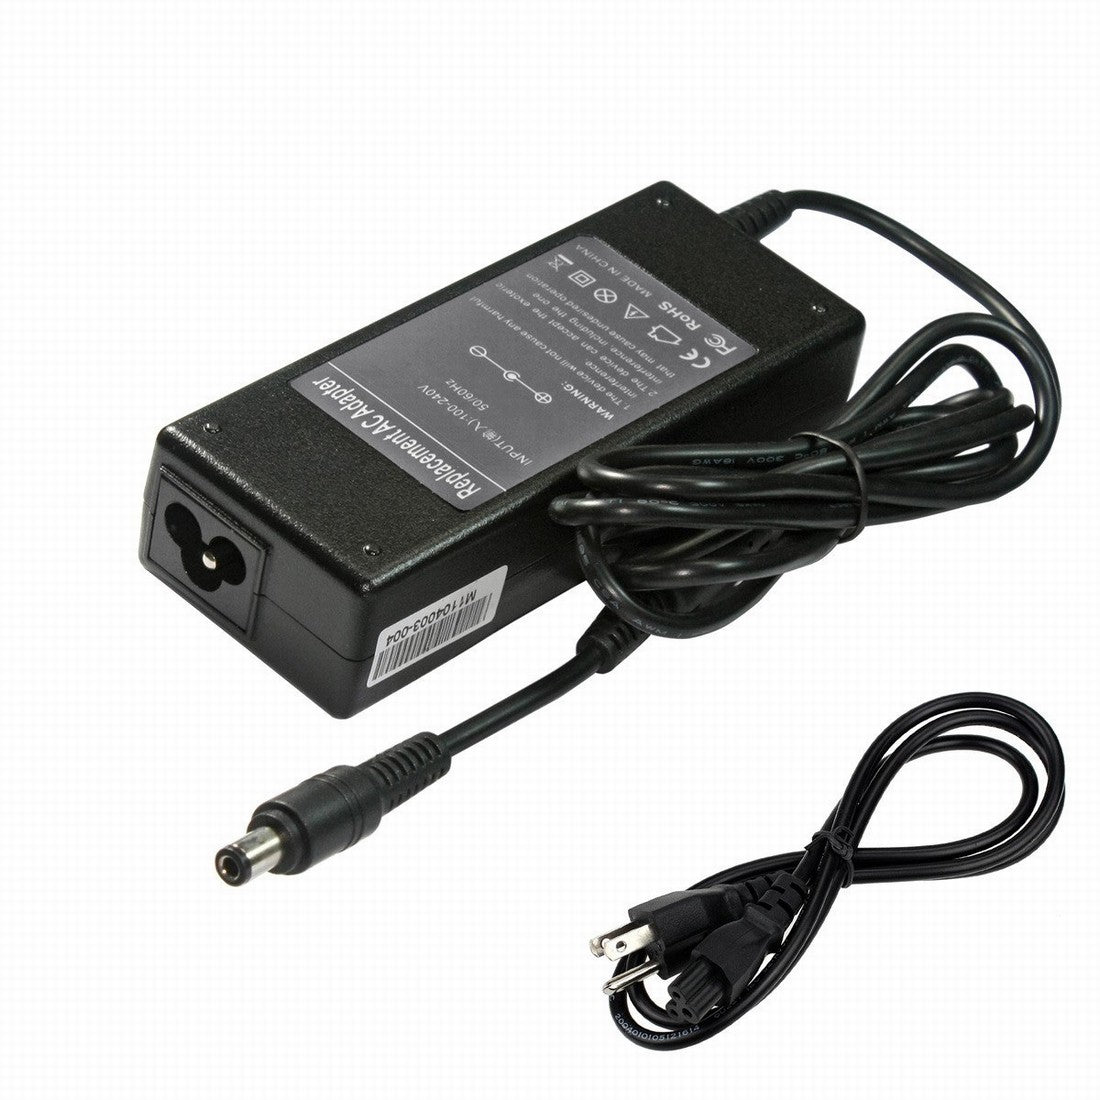 Power Supply for Acer AL1714 LCD Monitor.